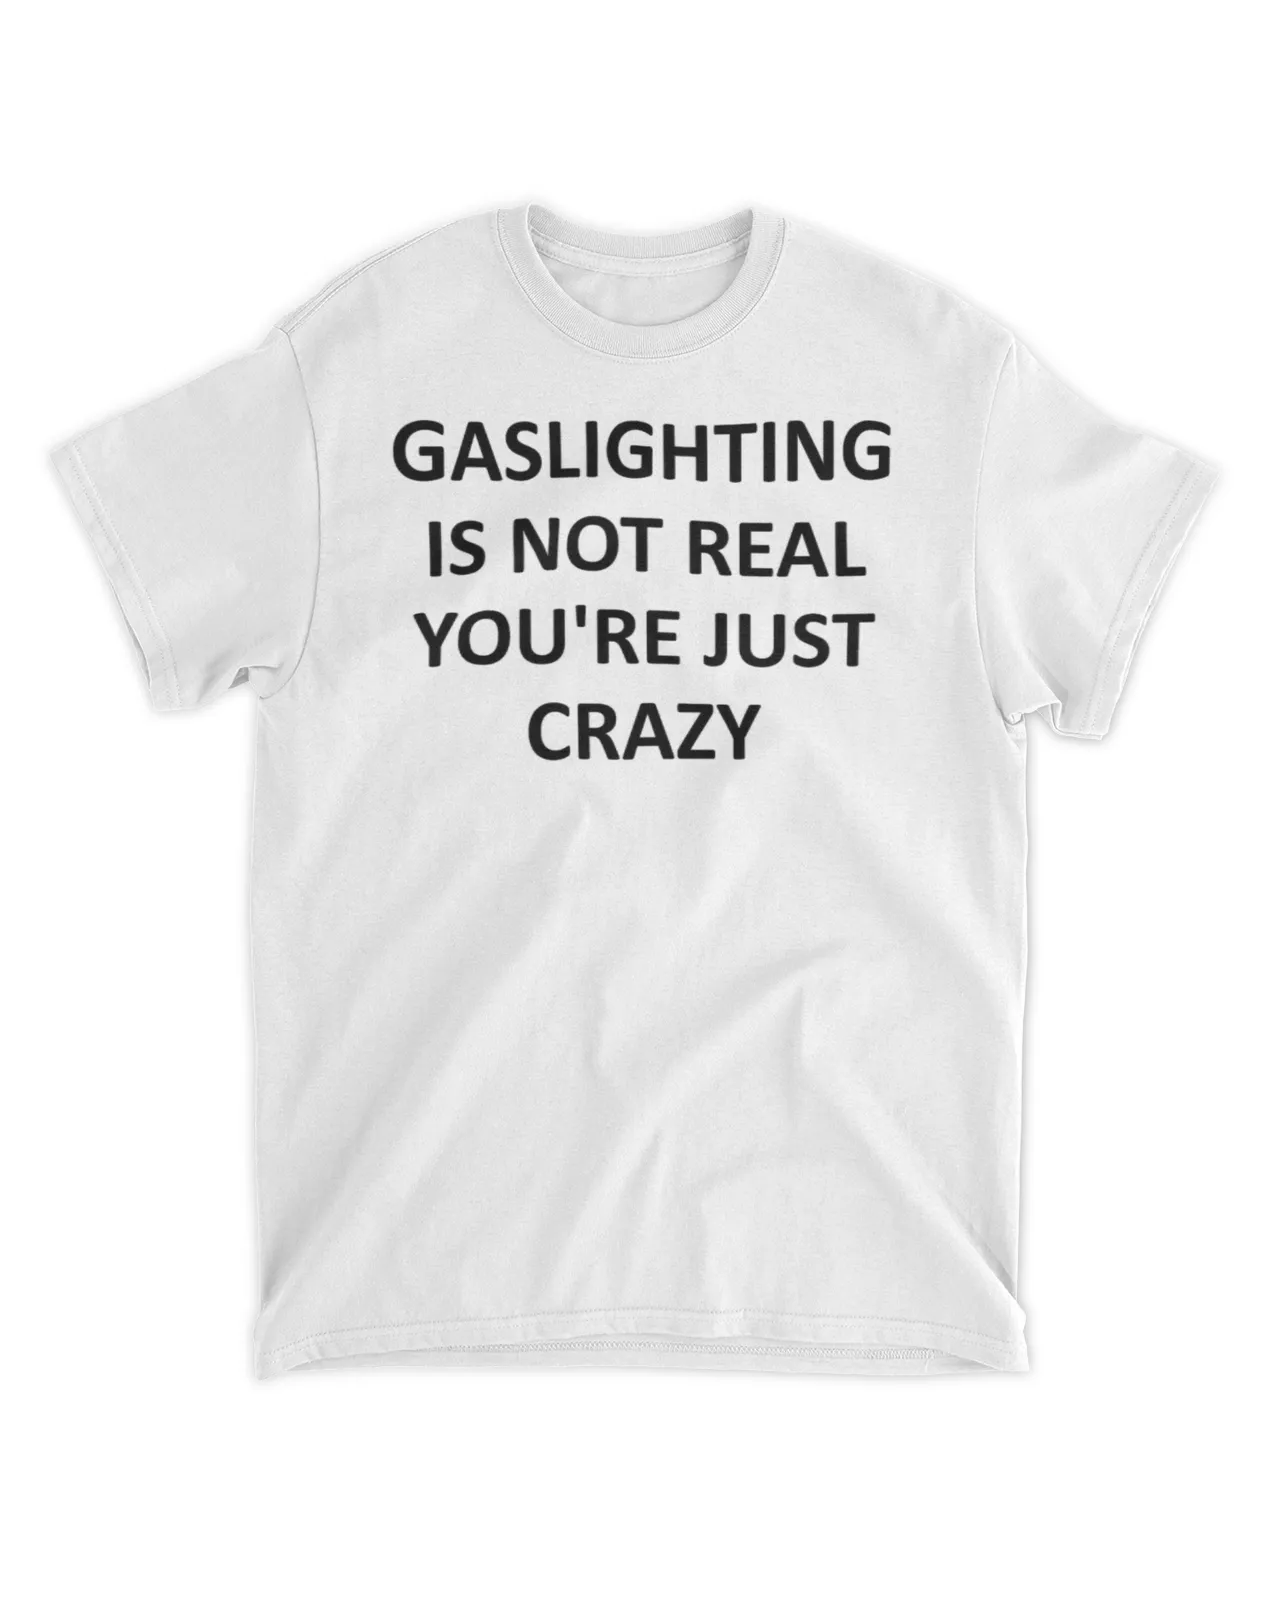  Gaslighting is not real you're just crazy shirt